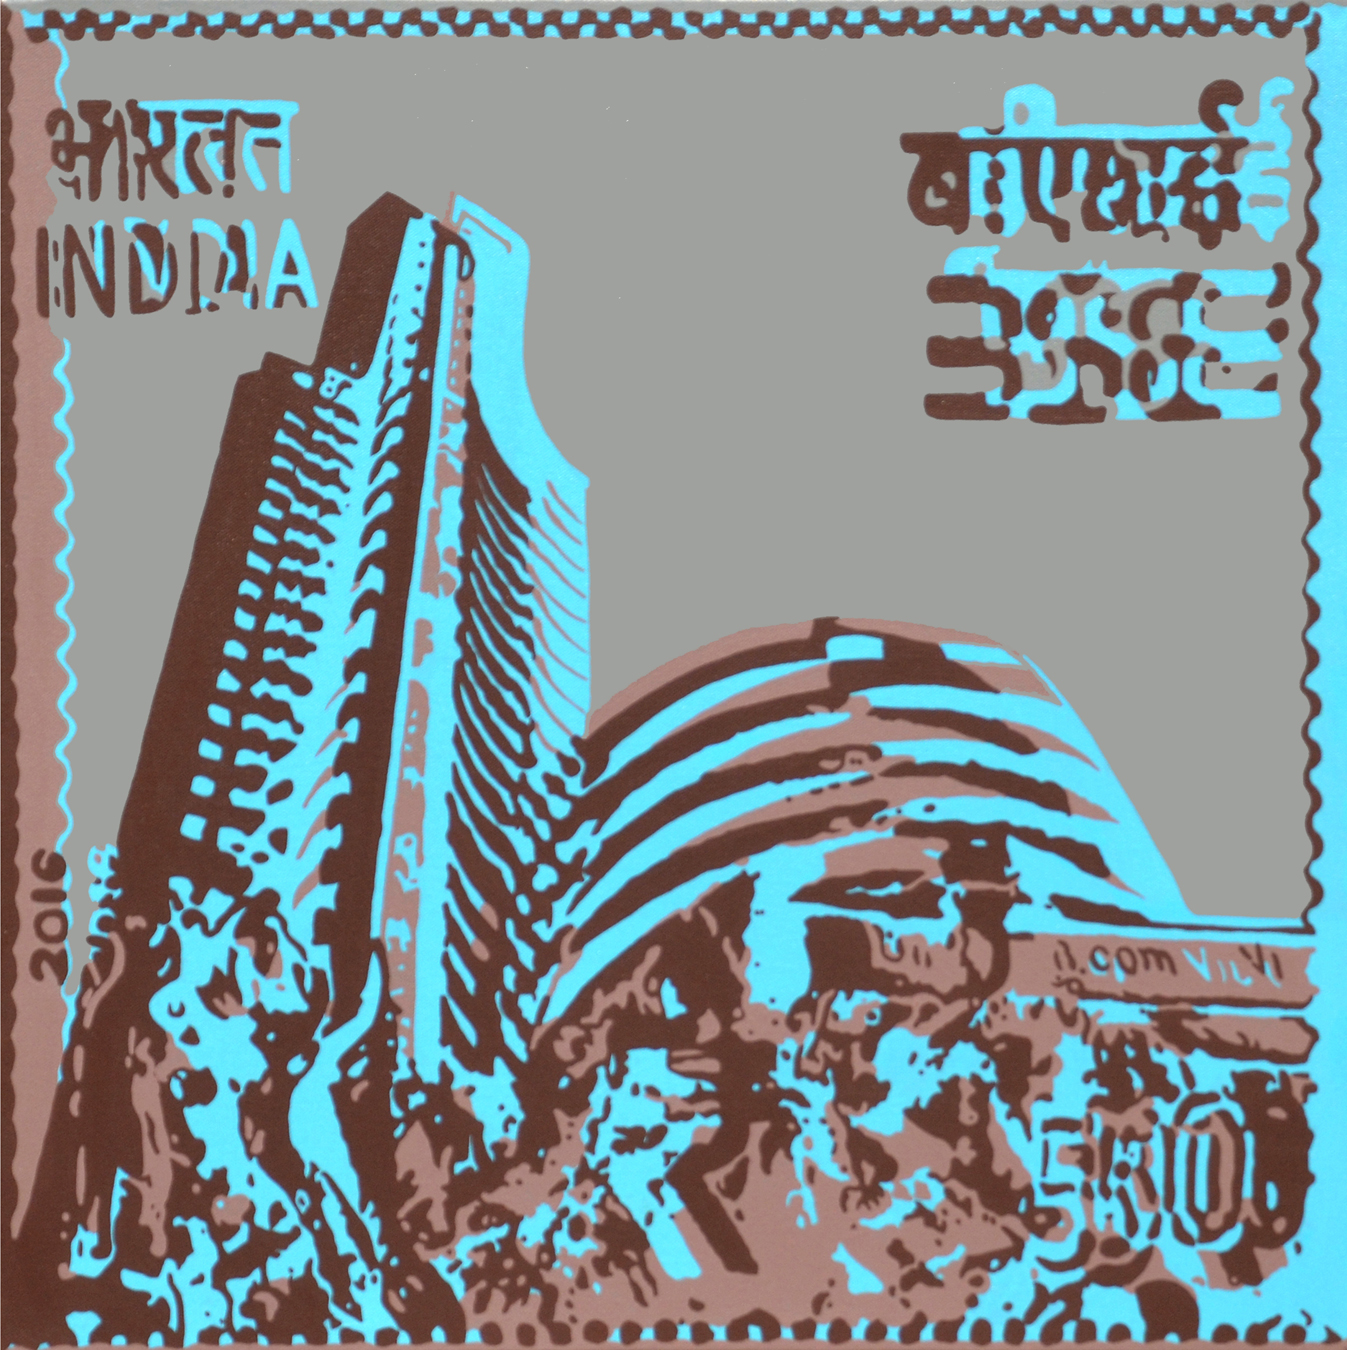 Stamp on BSE